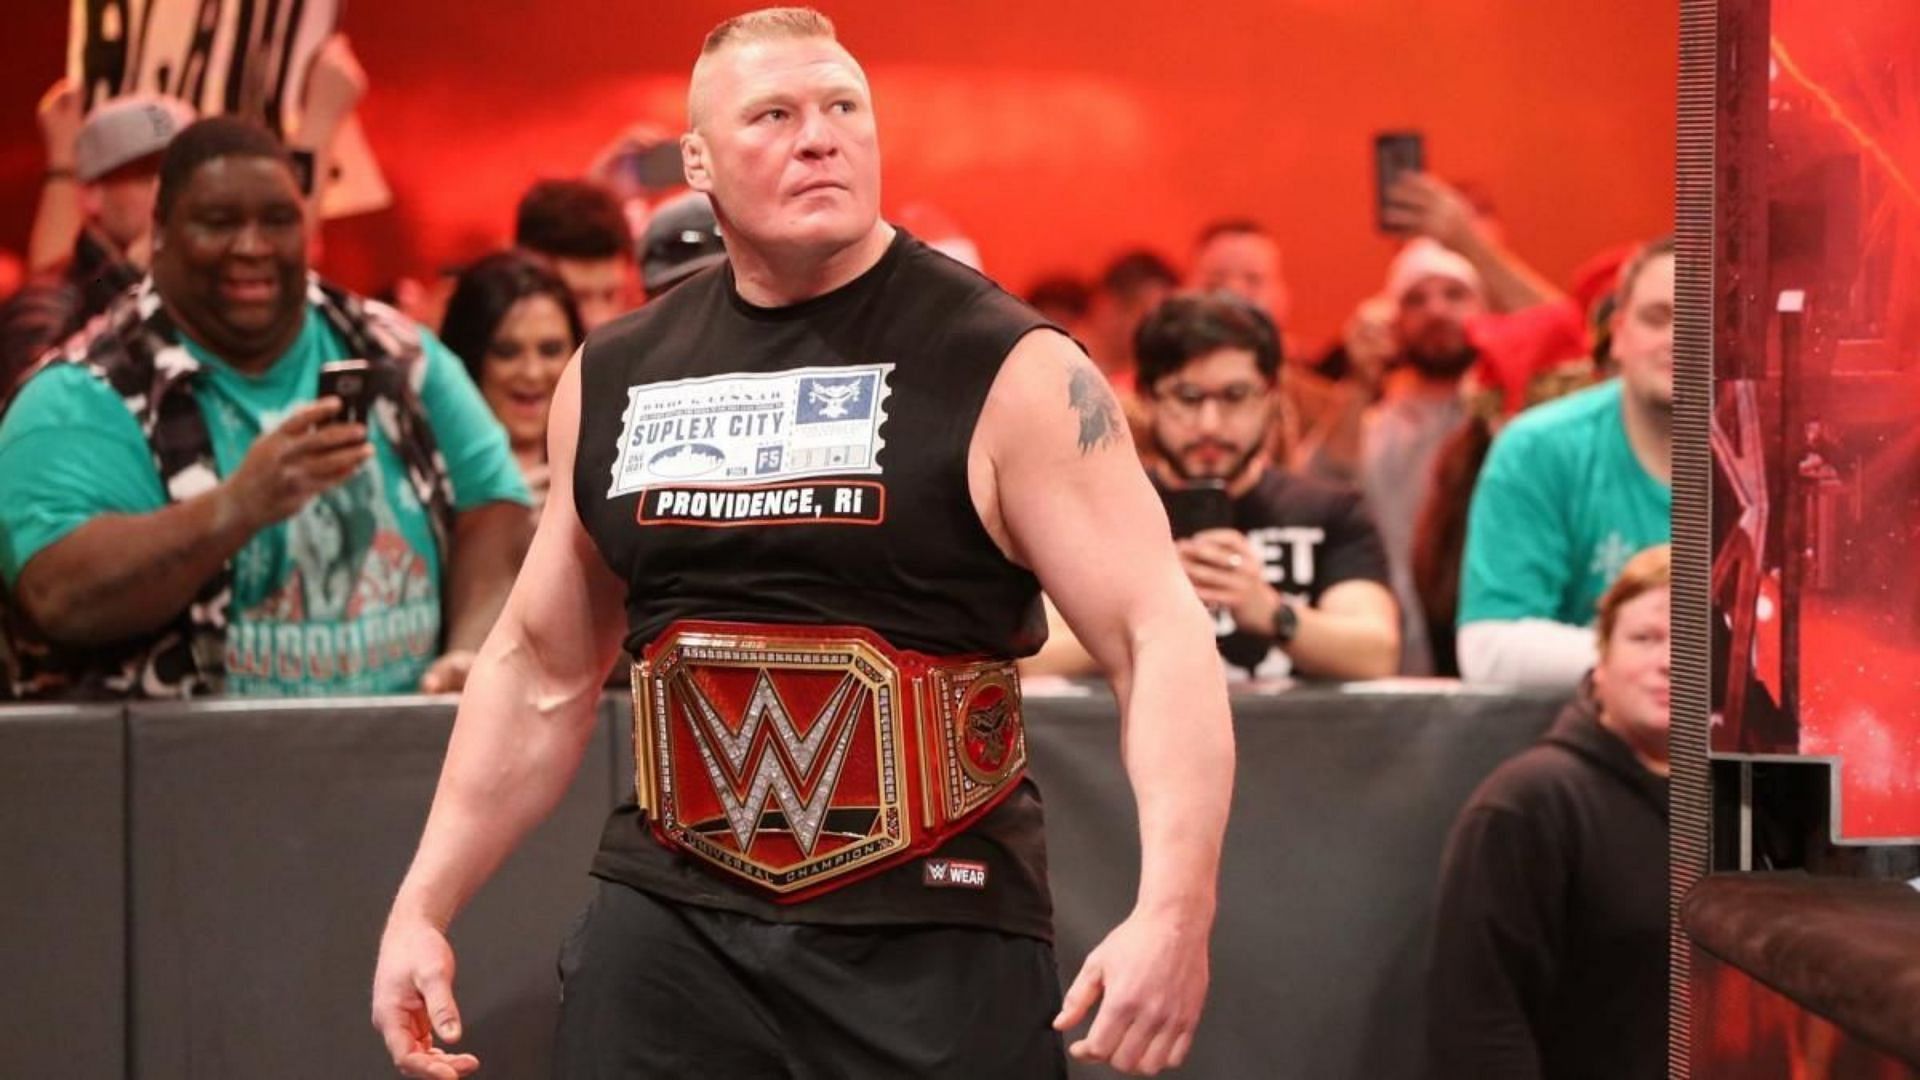 Brock Lesnar is a former WWE Universal Champion